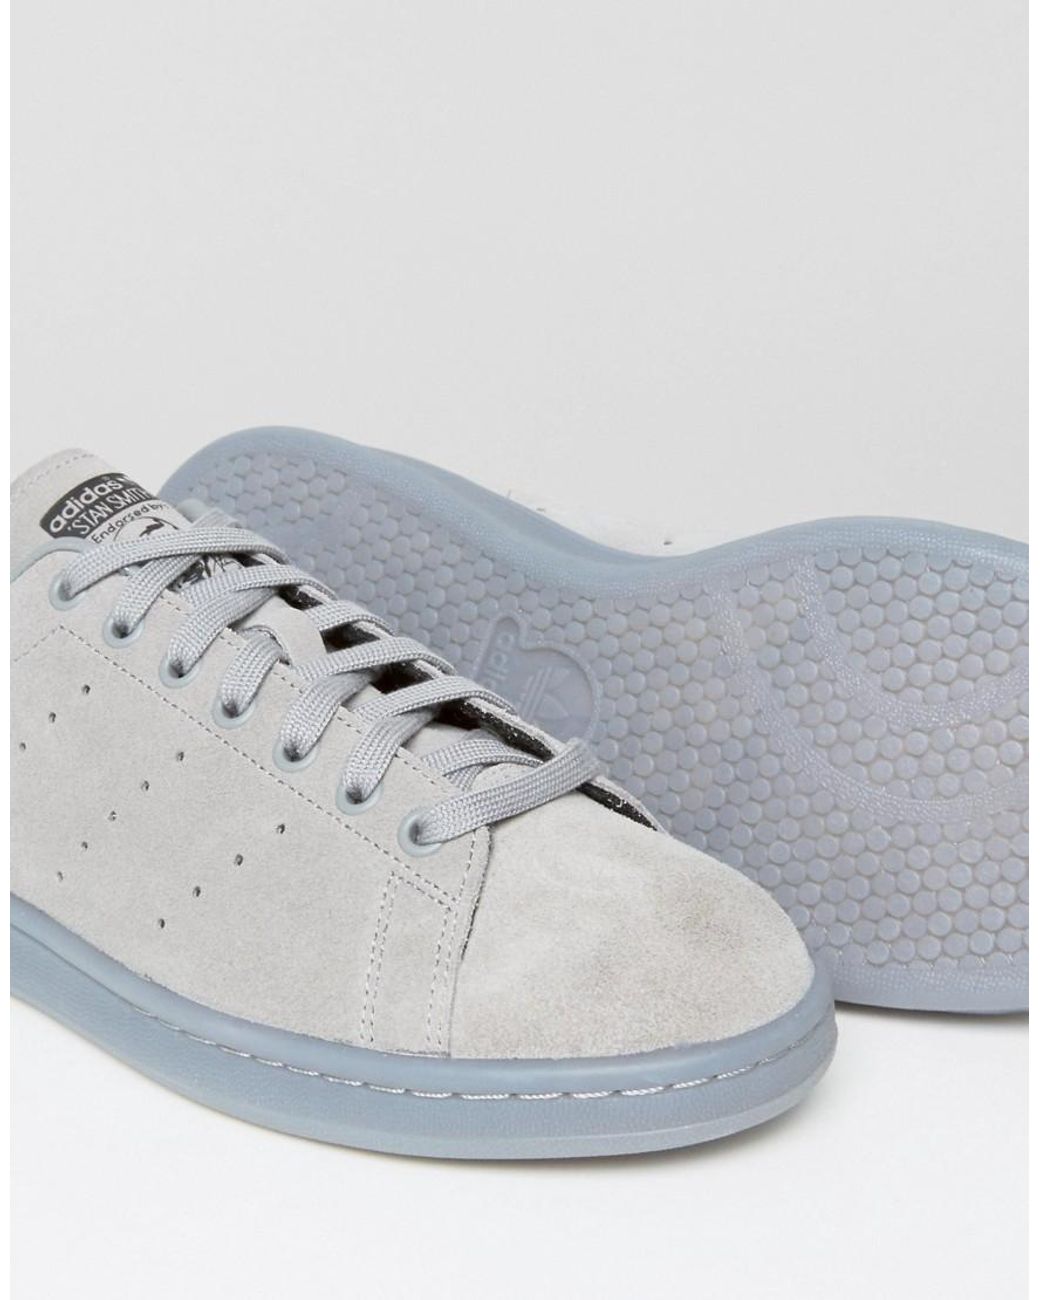 adidas Originals Stan Smith Trainers In Grey S80031 - Grey in Gray for Men  | Lyst